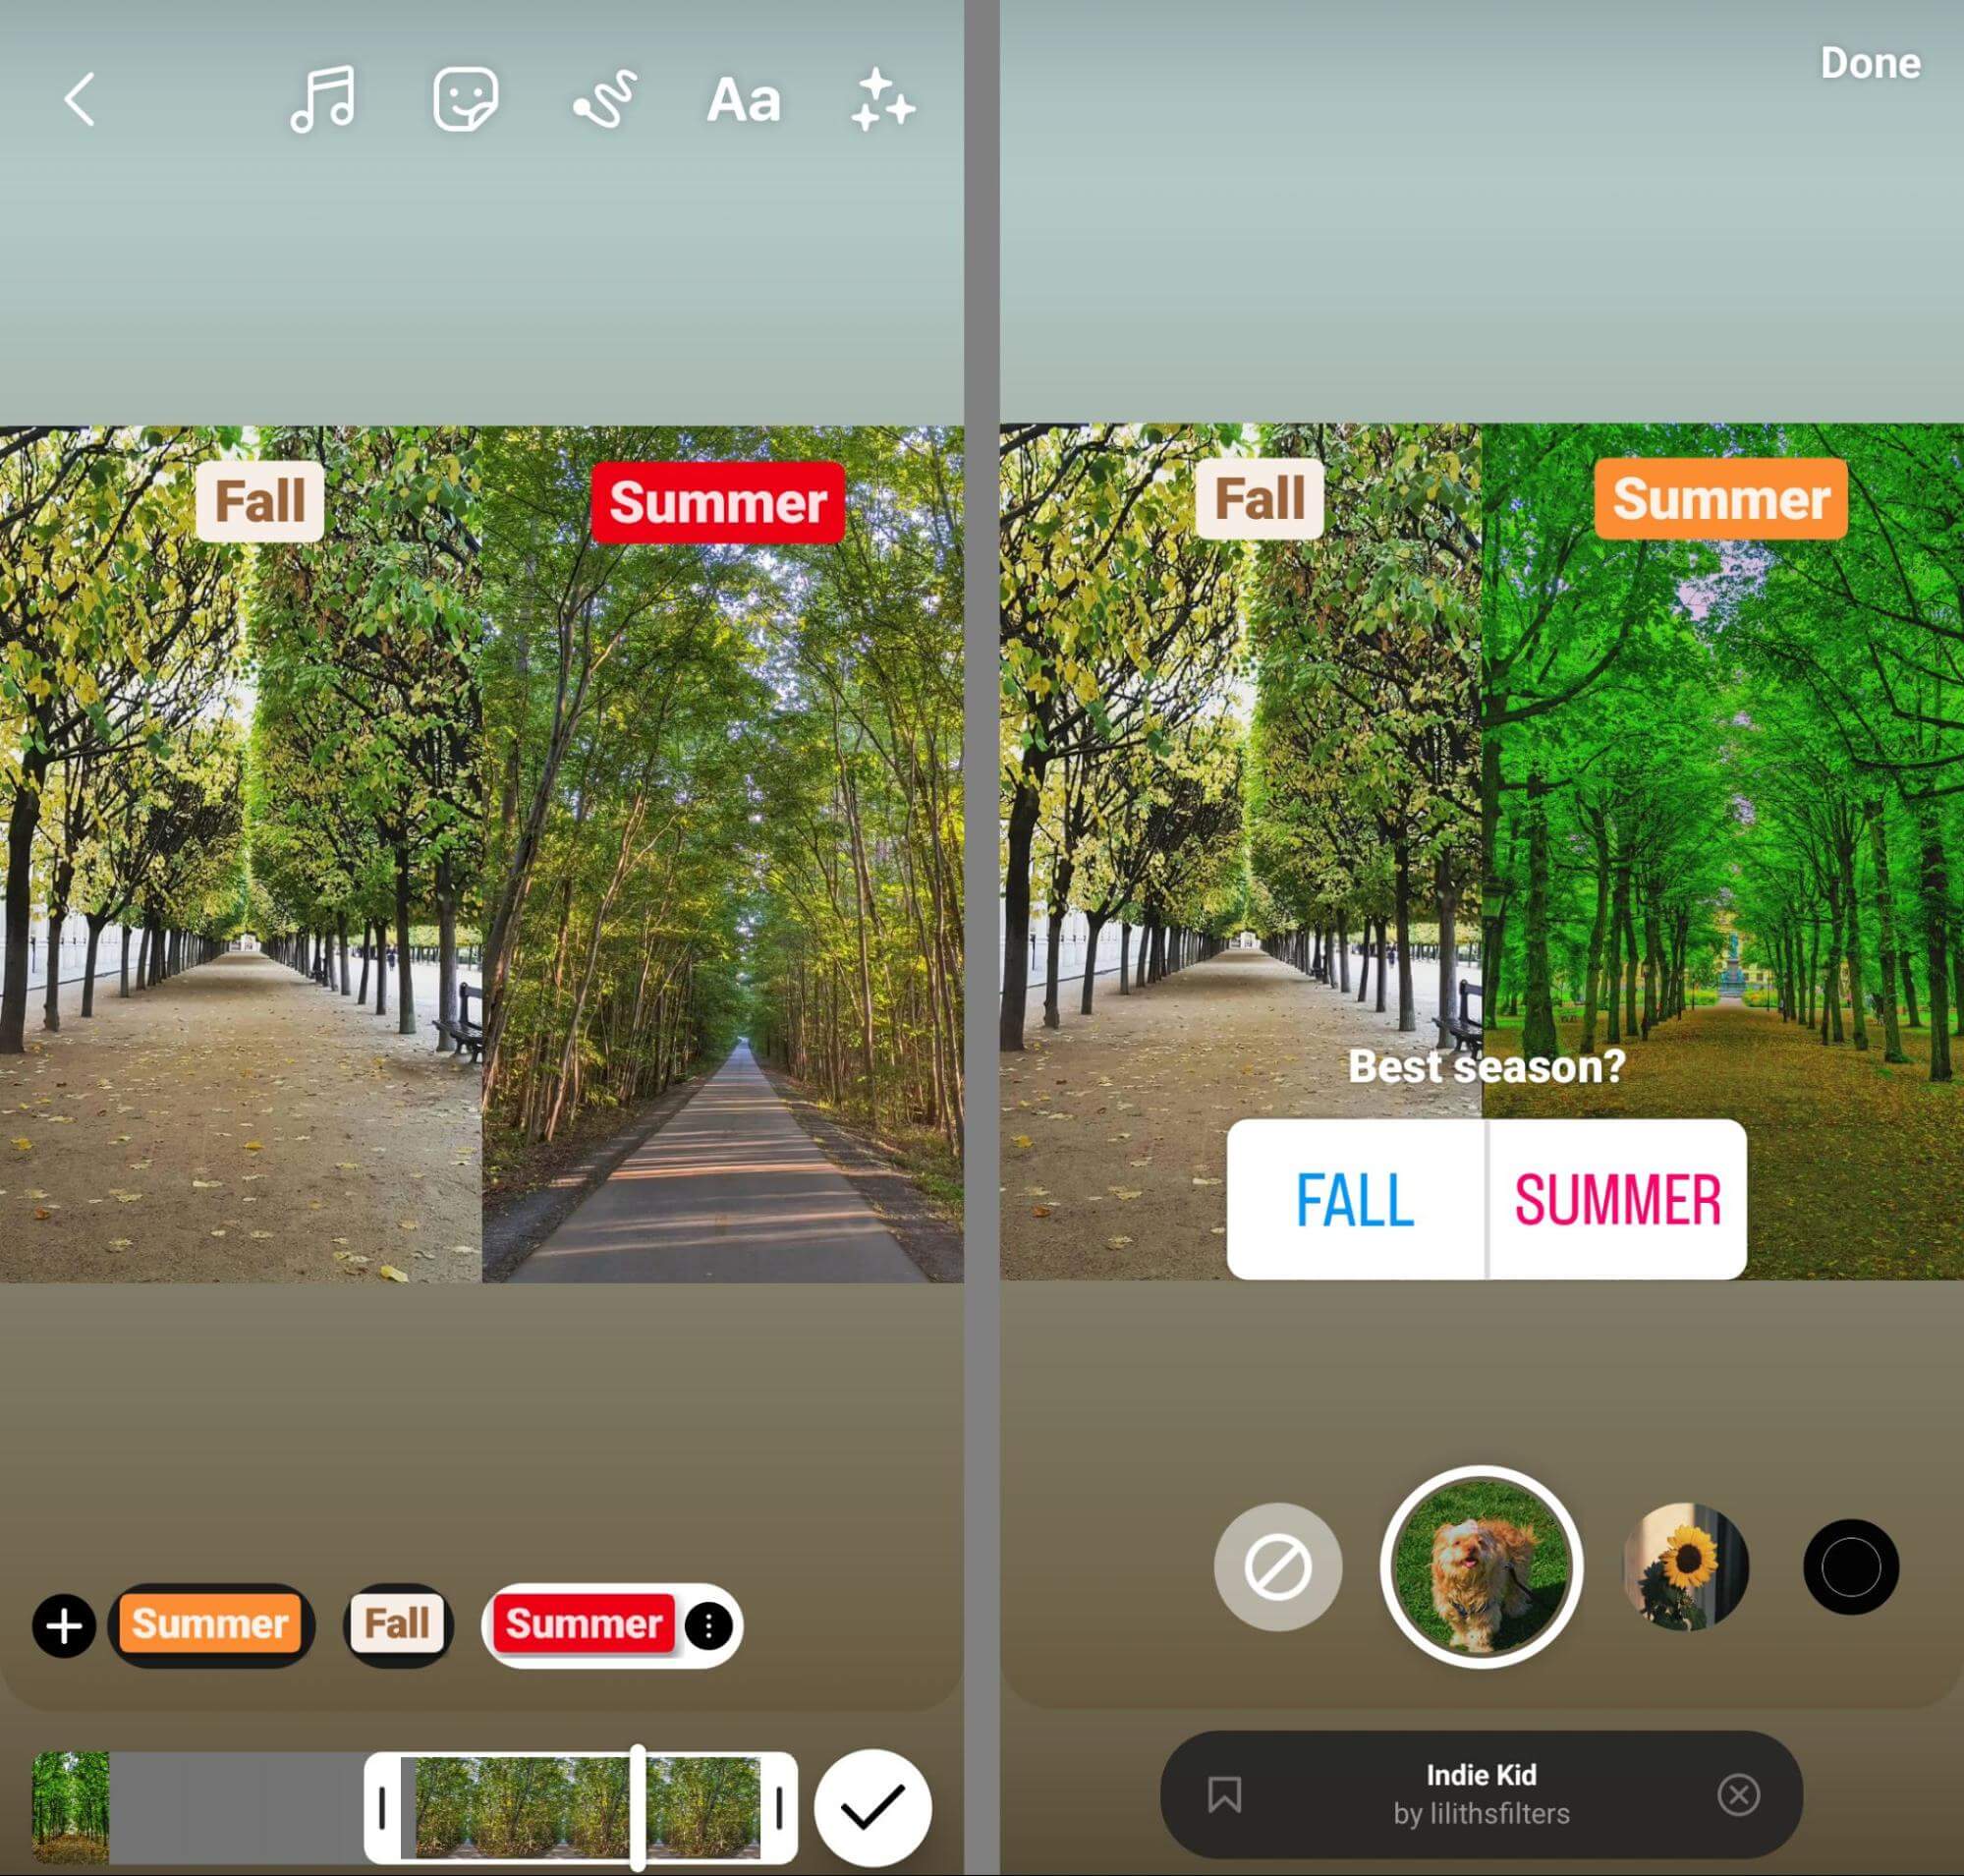 how-to-use-instagram-photo-remix-feature-add-stickers-text-markups-effects-built-in-tools-step-9